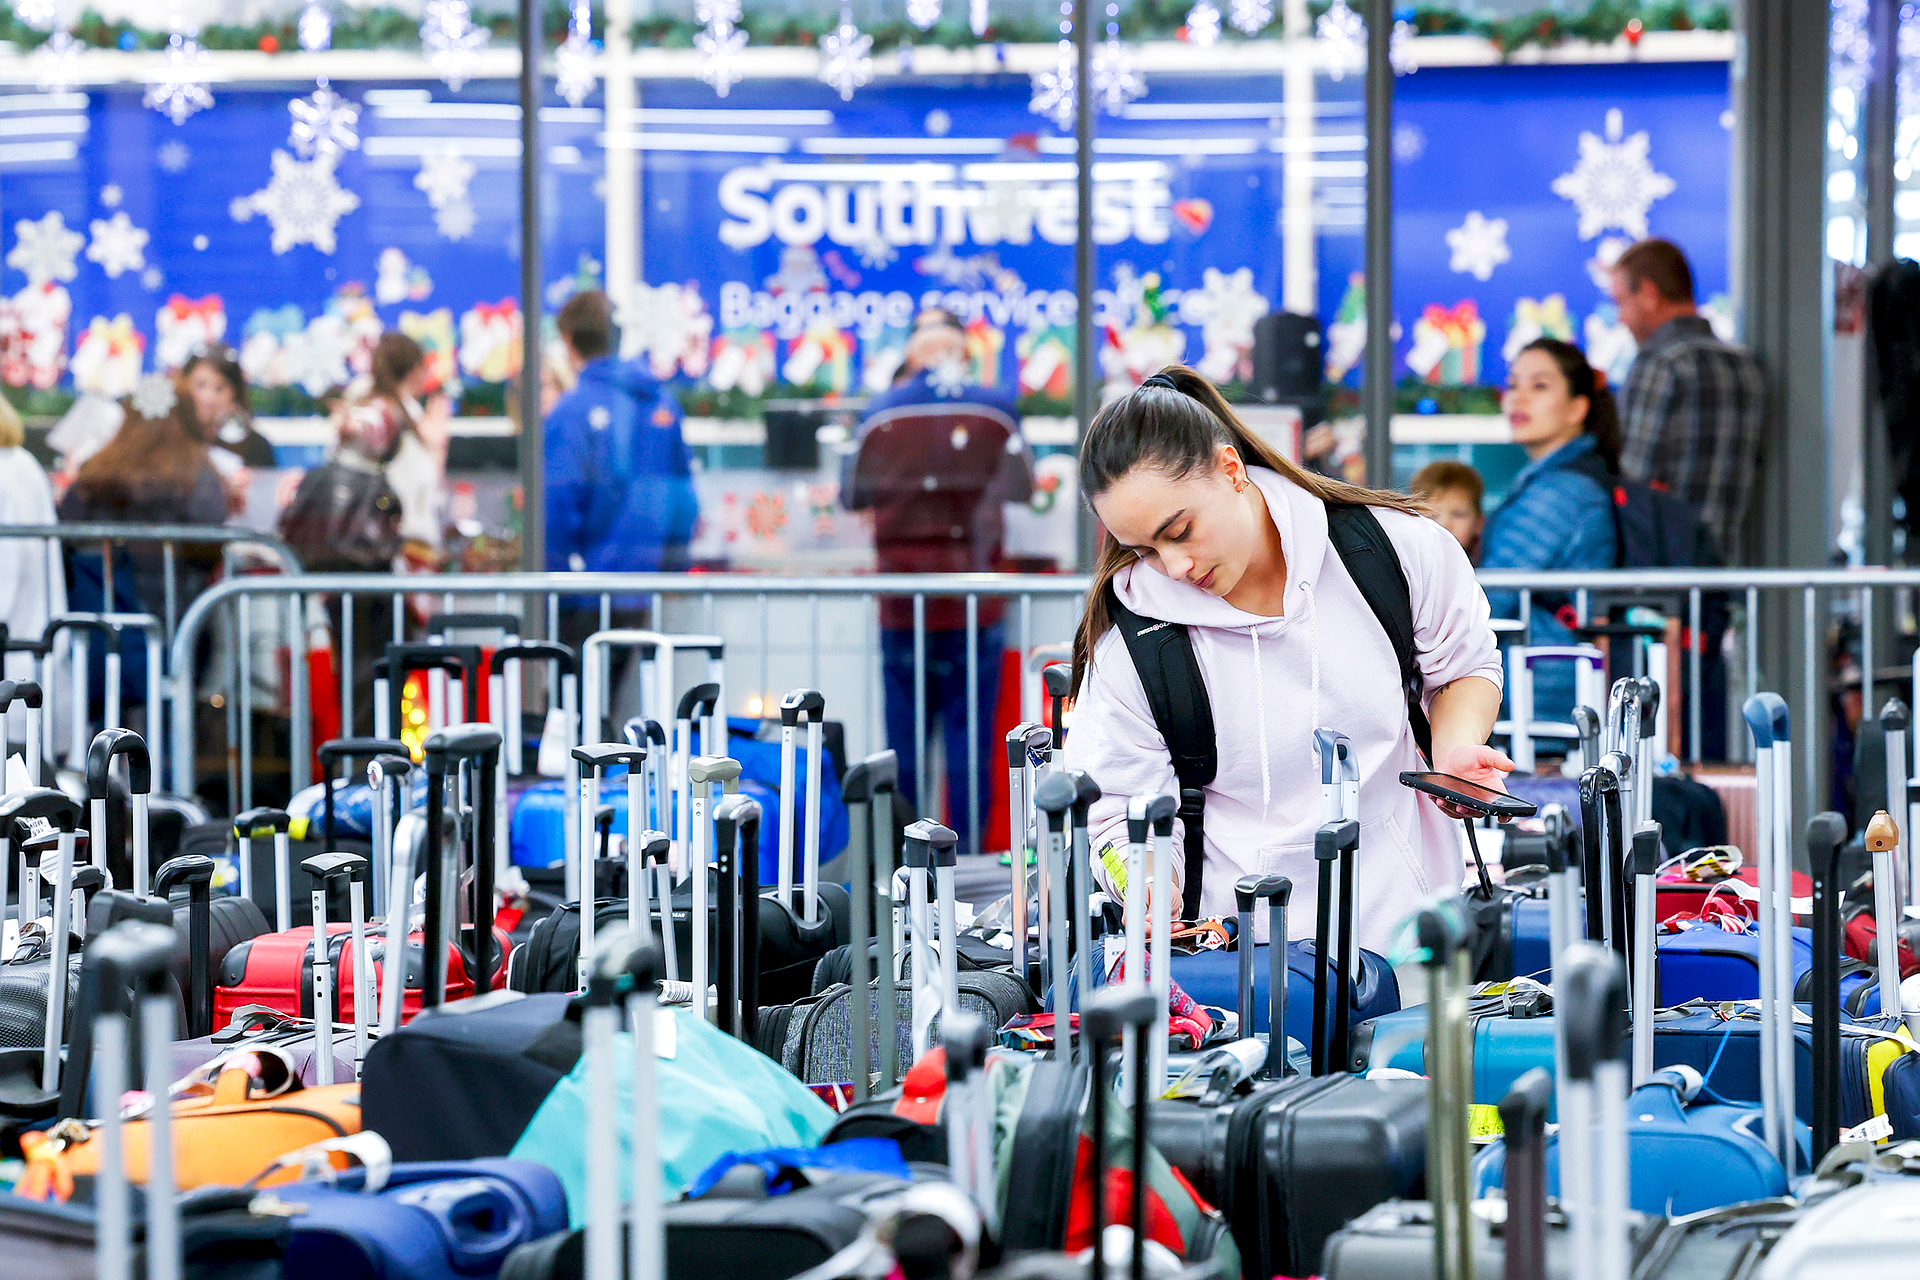 Southwest is America’s favorite economy airline. Analysts say that won’t change despite holiday meltdown.